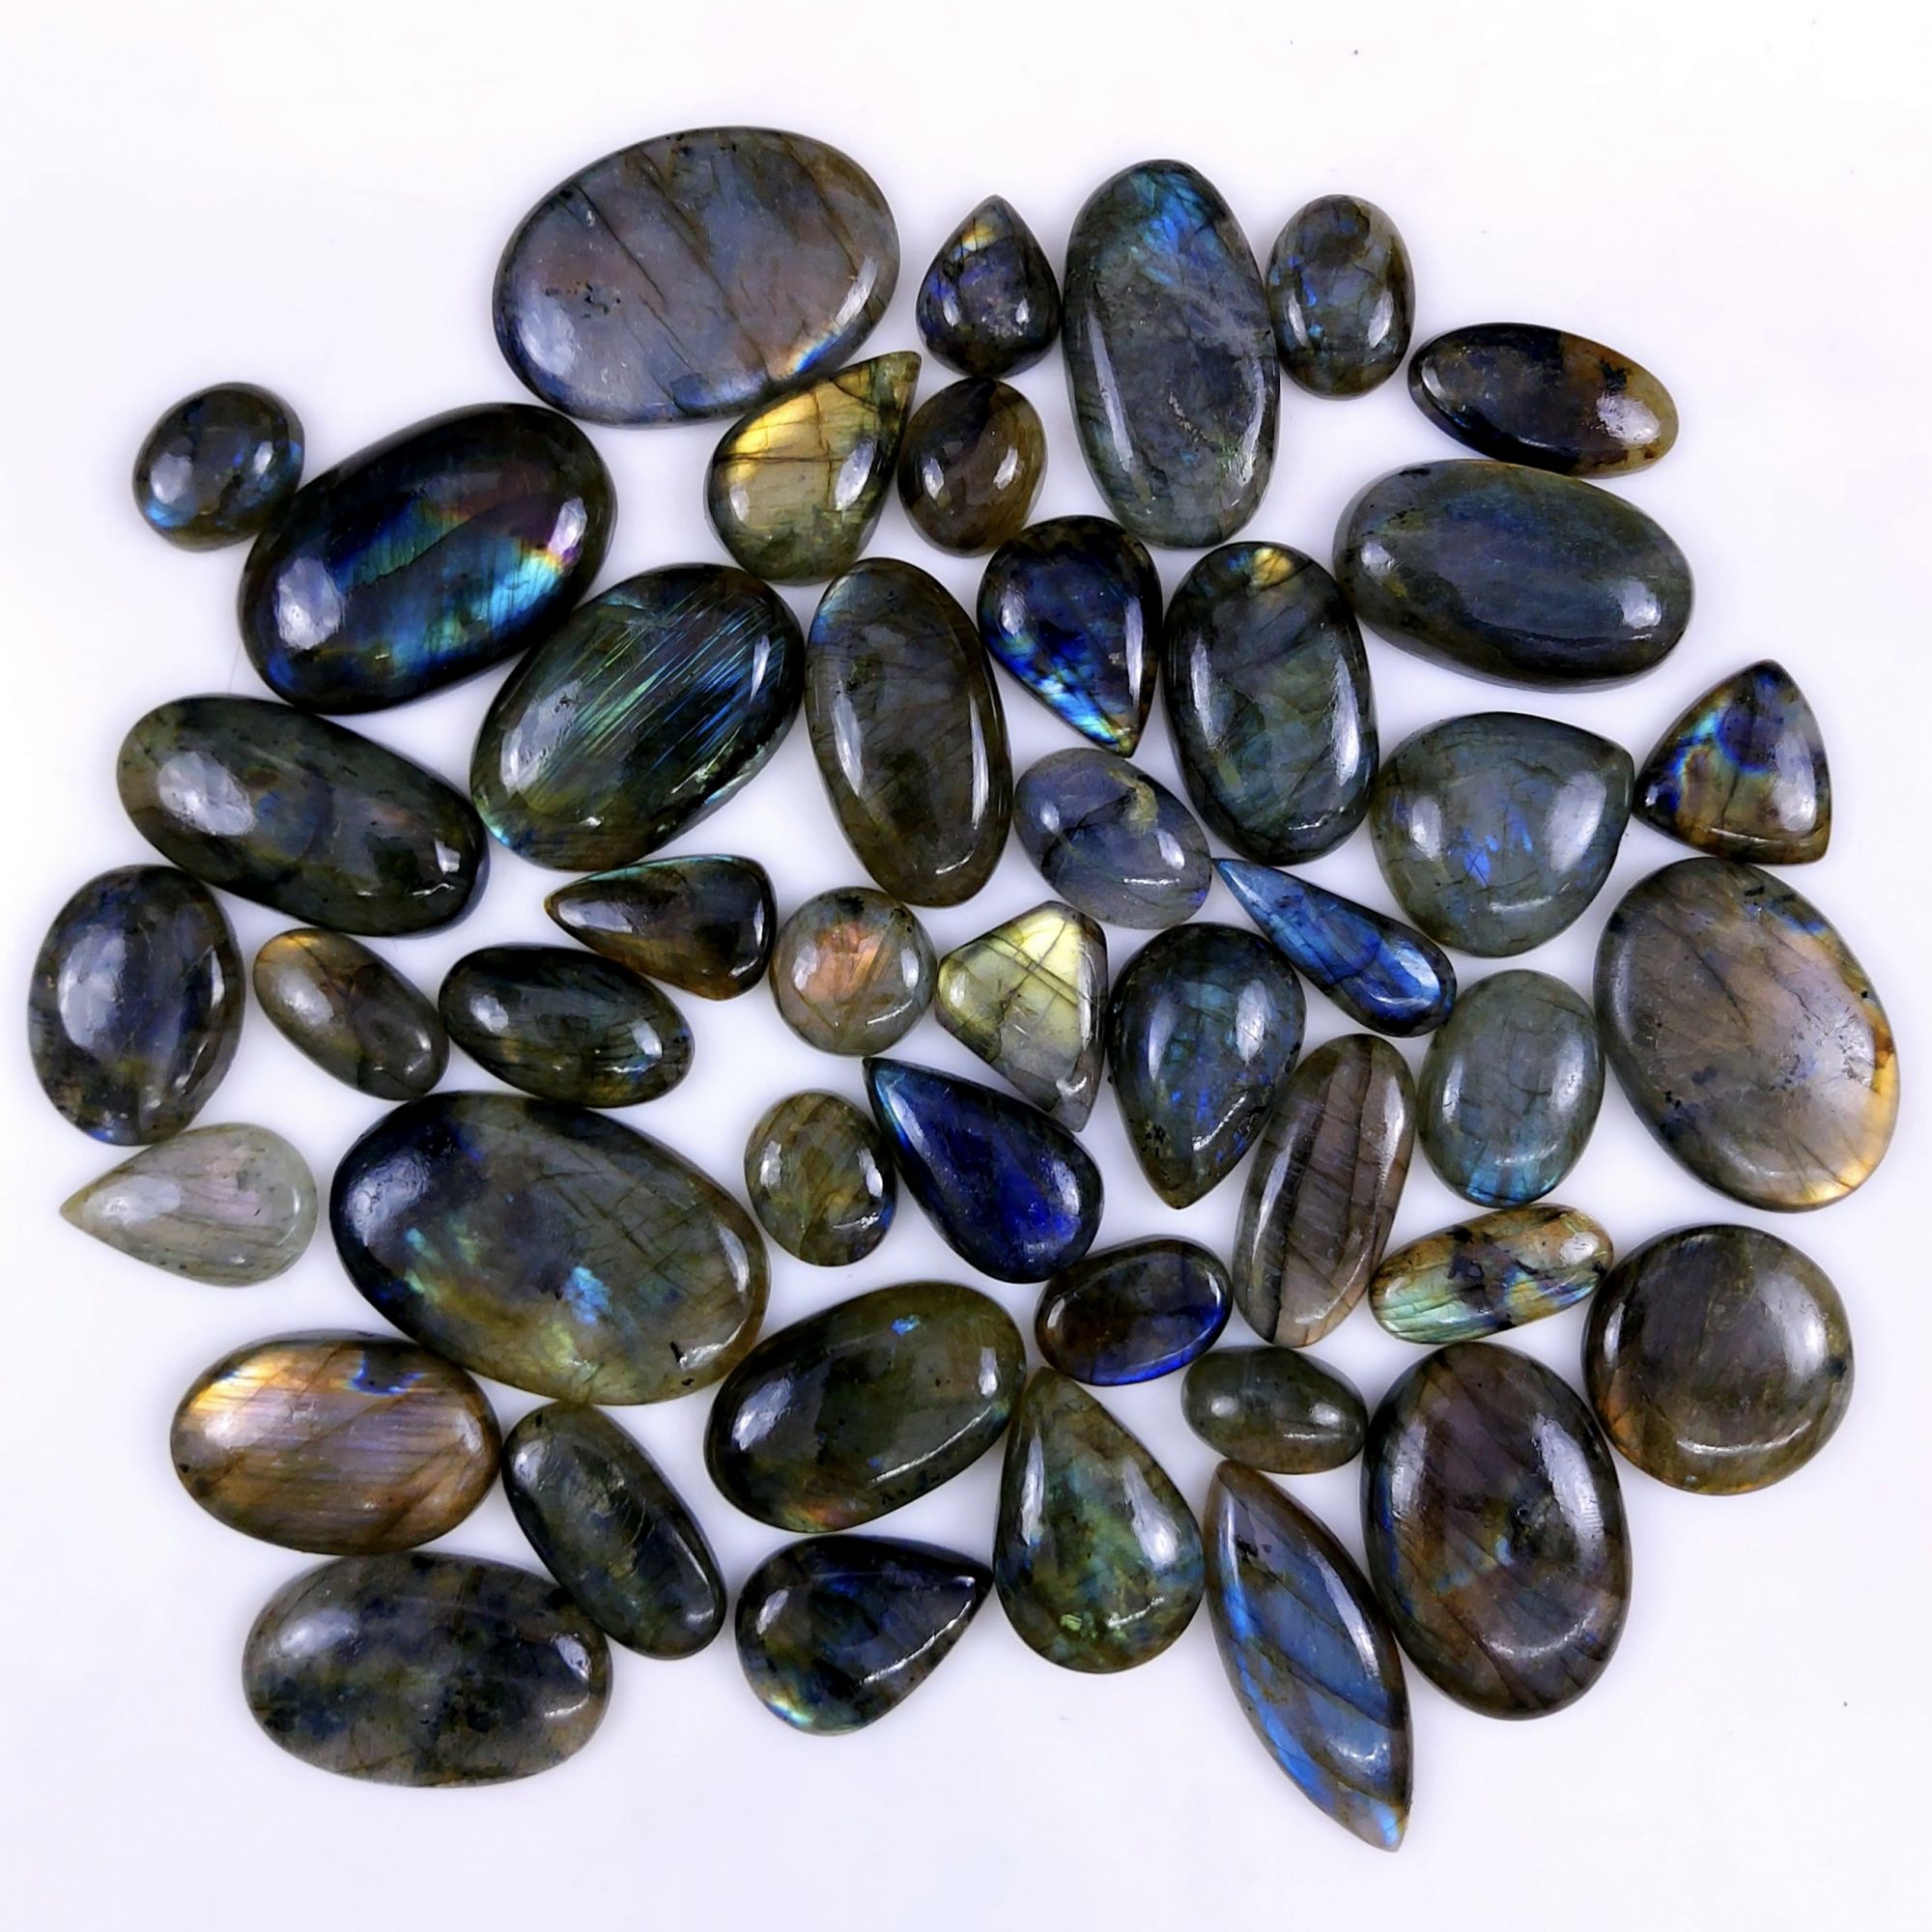 45pc 1596Cts Labradorite Cabochon Multifire Healing Crystal For Jewelry Supplies, Labradorite Necklace Handmade Wire Wrapped Gemstone Pendant 40x27 12x9mm#6306